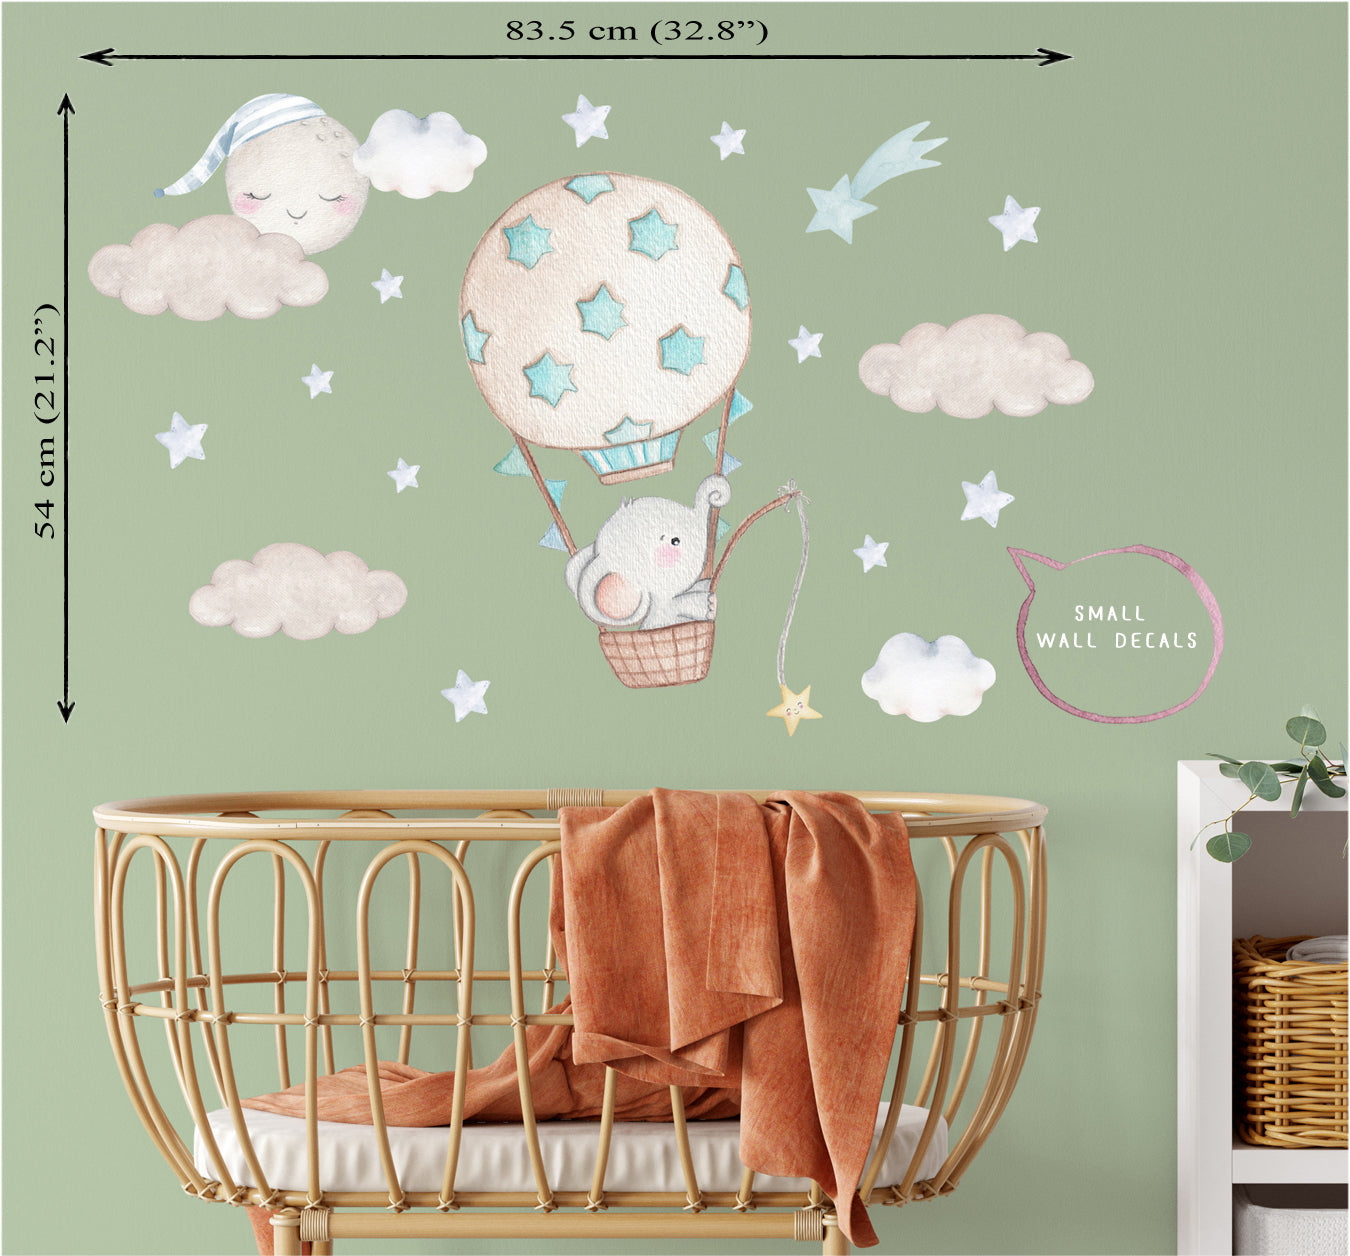 The elephant in the hot air balloon. Baby's room small wall decals. Blue stars.